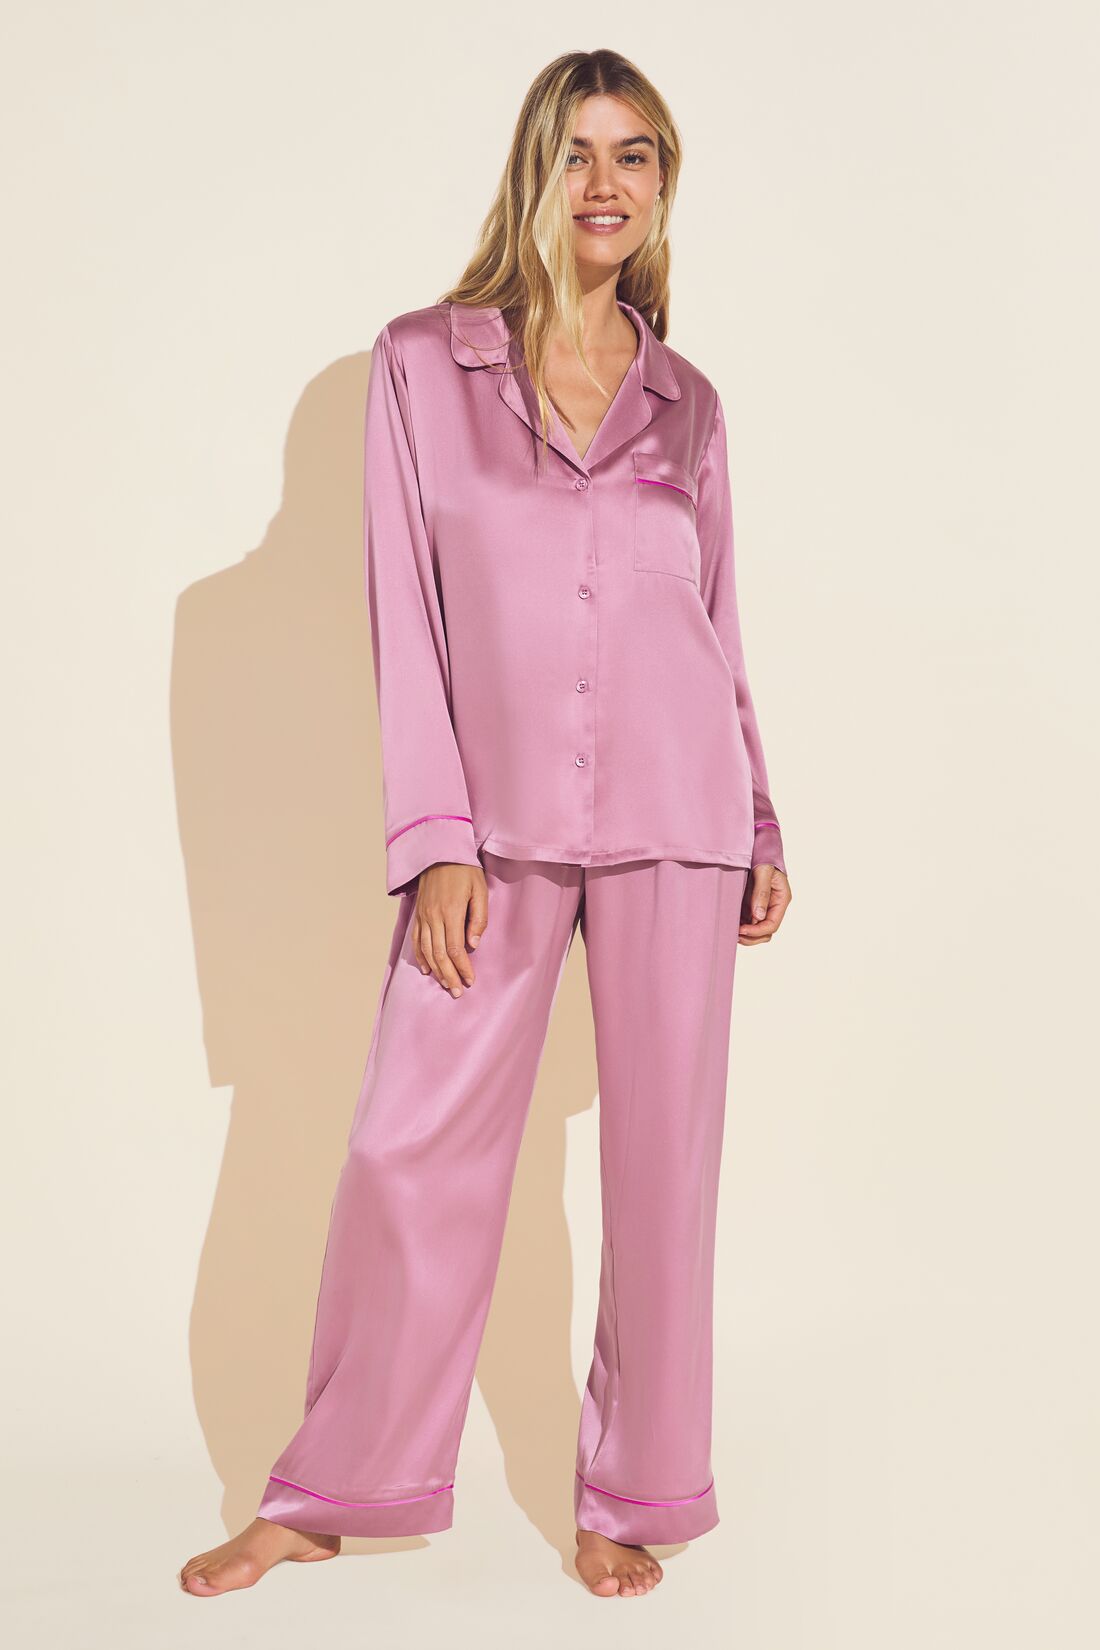 Washable 100% Mulberry Silk Pajama Set Button Up Blouse